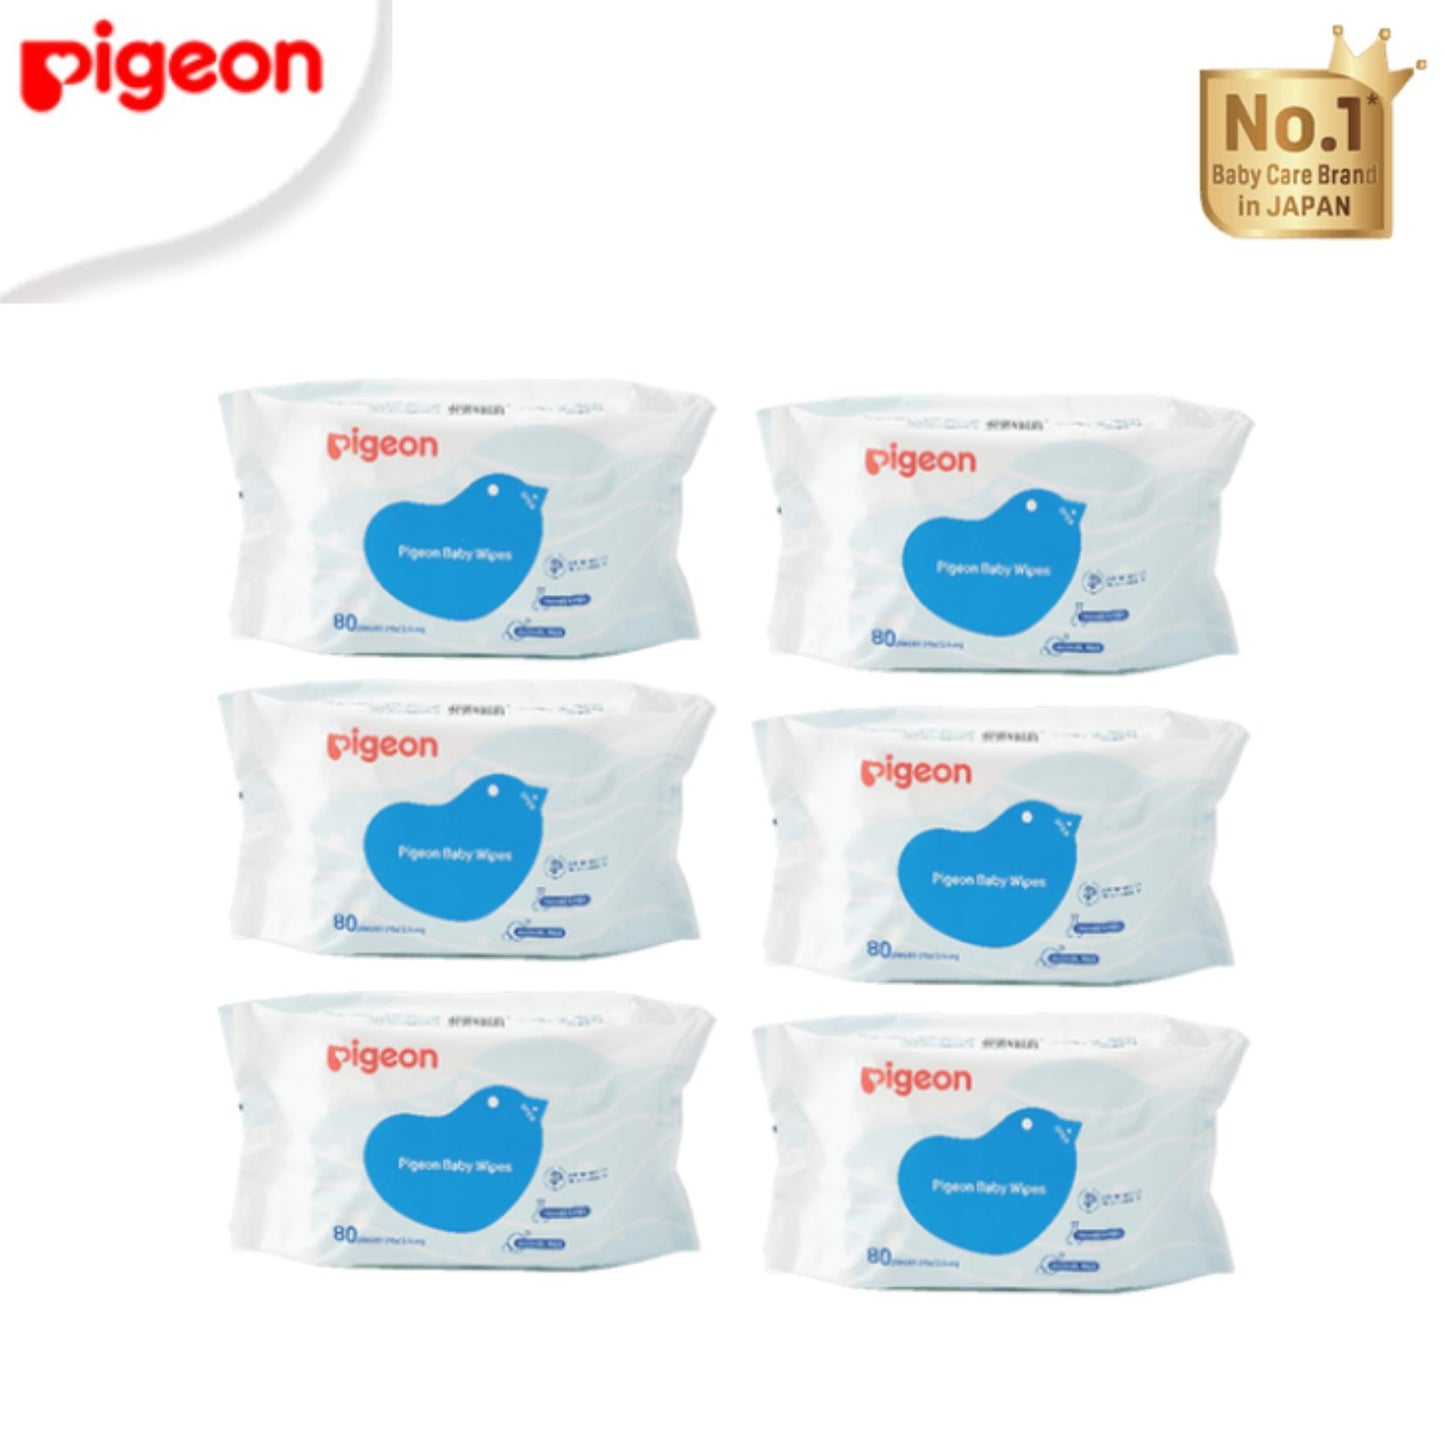 PIgeon Baby Wipes 80's Water Base Refill PK6